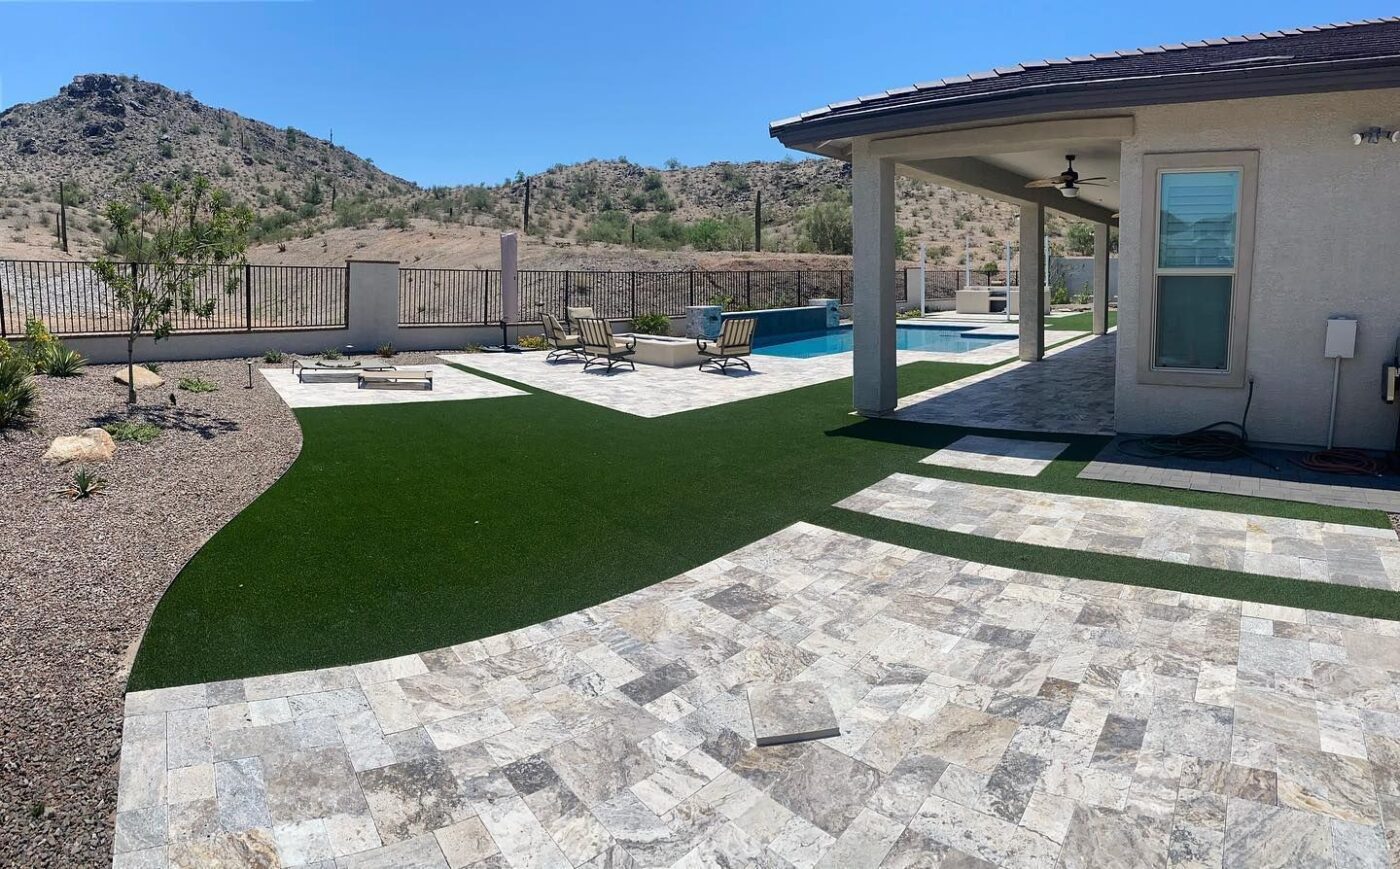 A backyard in Palm Valley, FL with a spacious patio featuring stone tiles, a pool under a covered area with a ceiling fan, lounge chairs by the pool, and Jacksonville Artificial Turf. The yard is enclosed by a fence, and the background showcases a hilly, desert landscape under a clear sky.